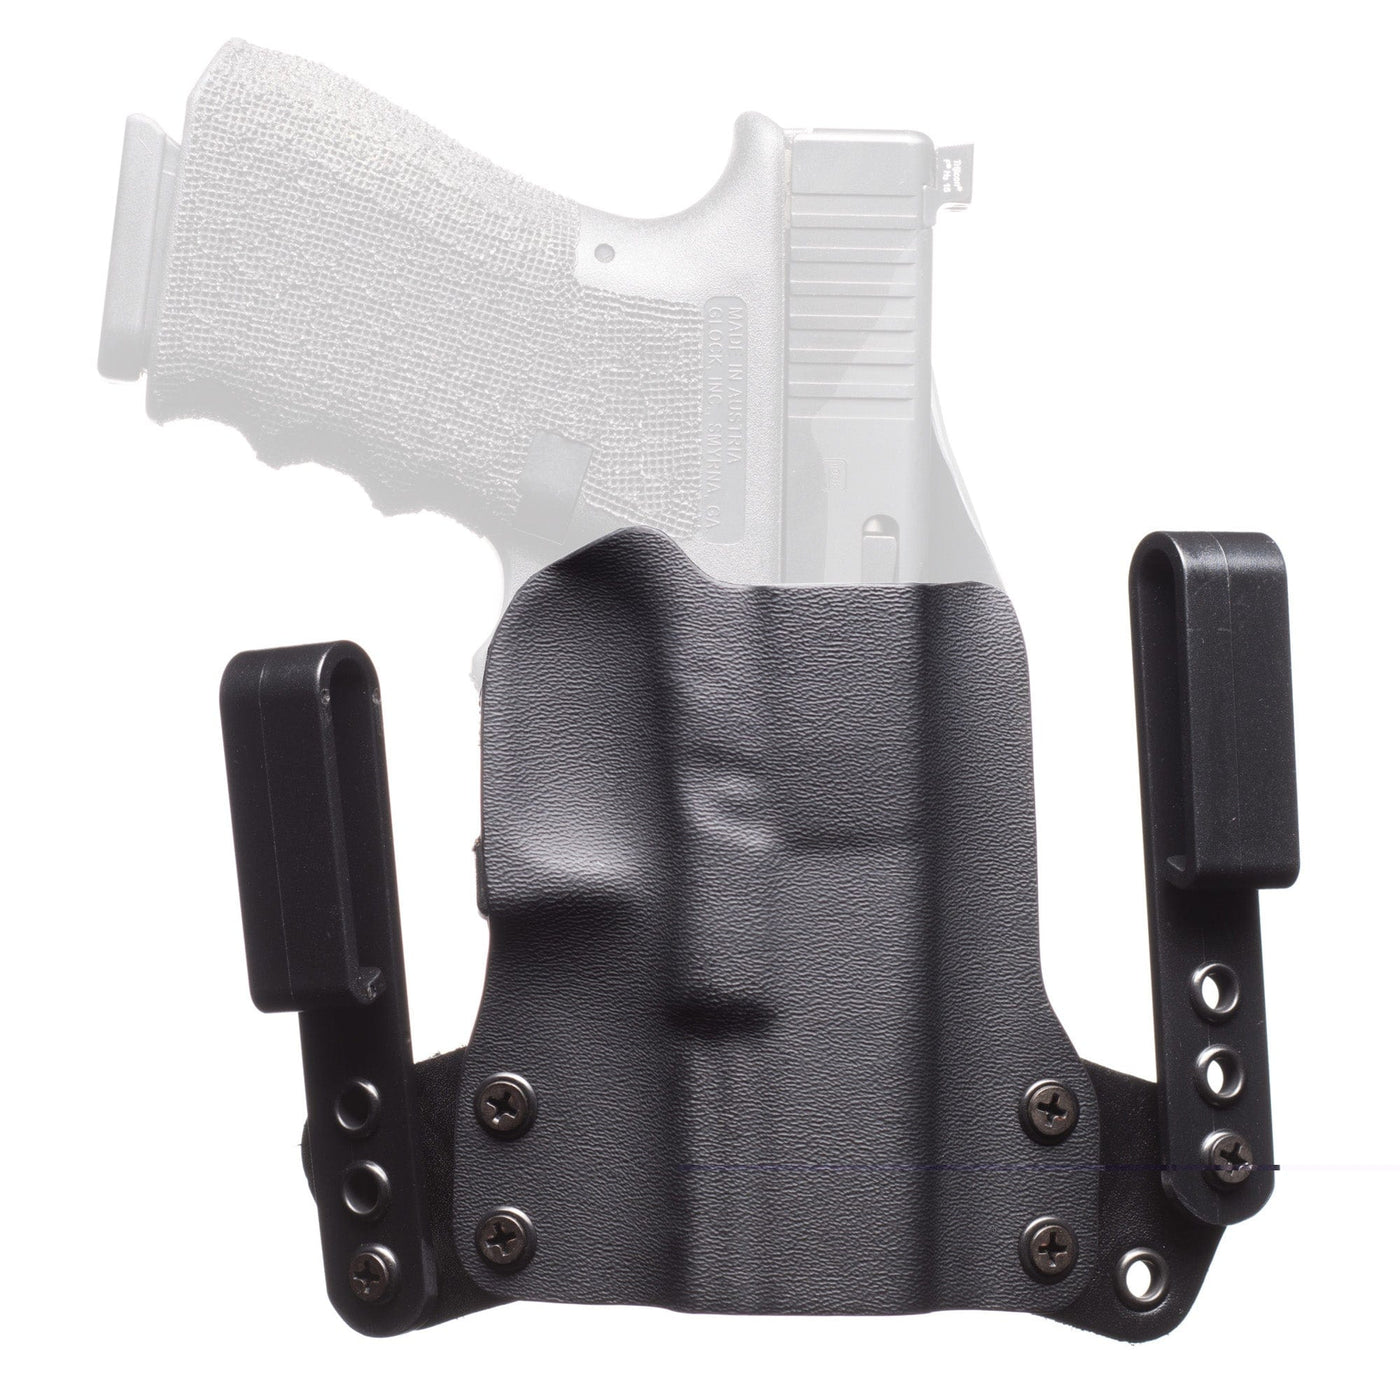 BlackPoint Tactical Blk Pnt Mini Wing Fn 510/545 Rh Blk Holsters